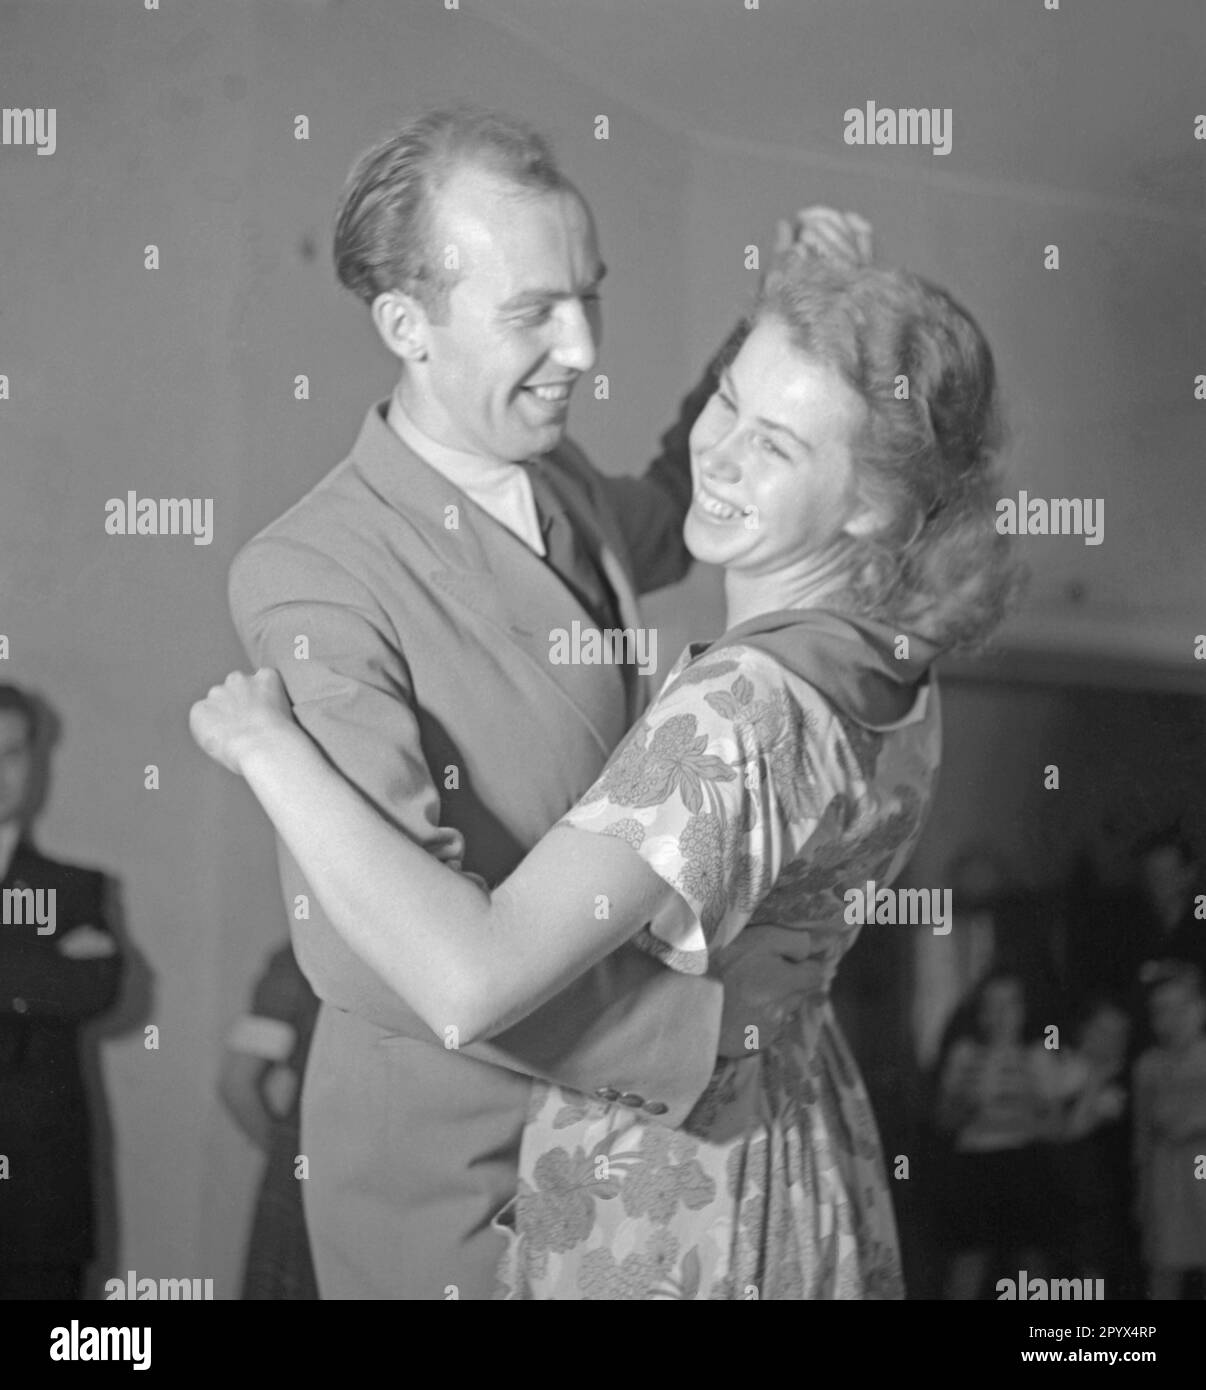 A man is dancing with a woman. Undated picture, probably from the year 1950. Stock Photo